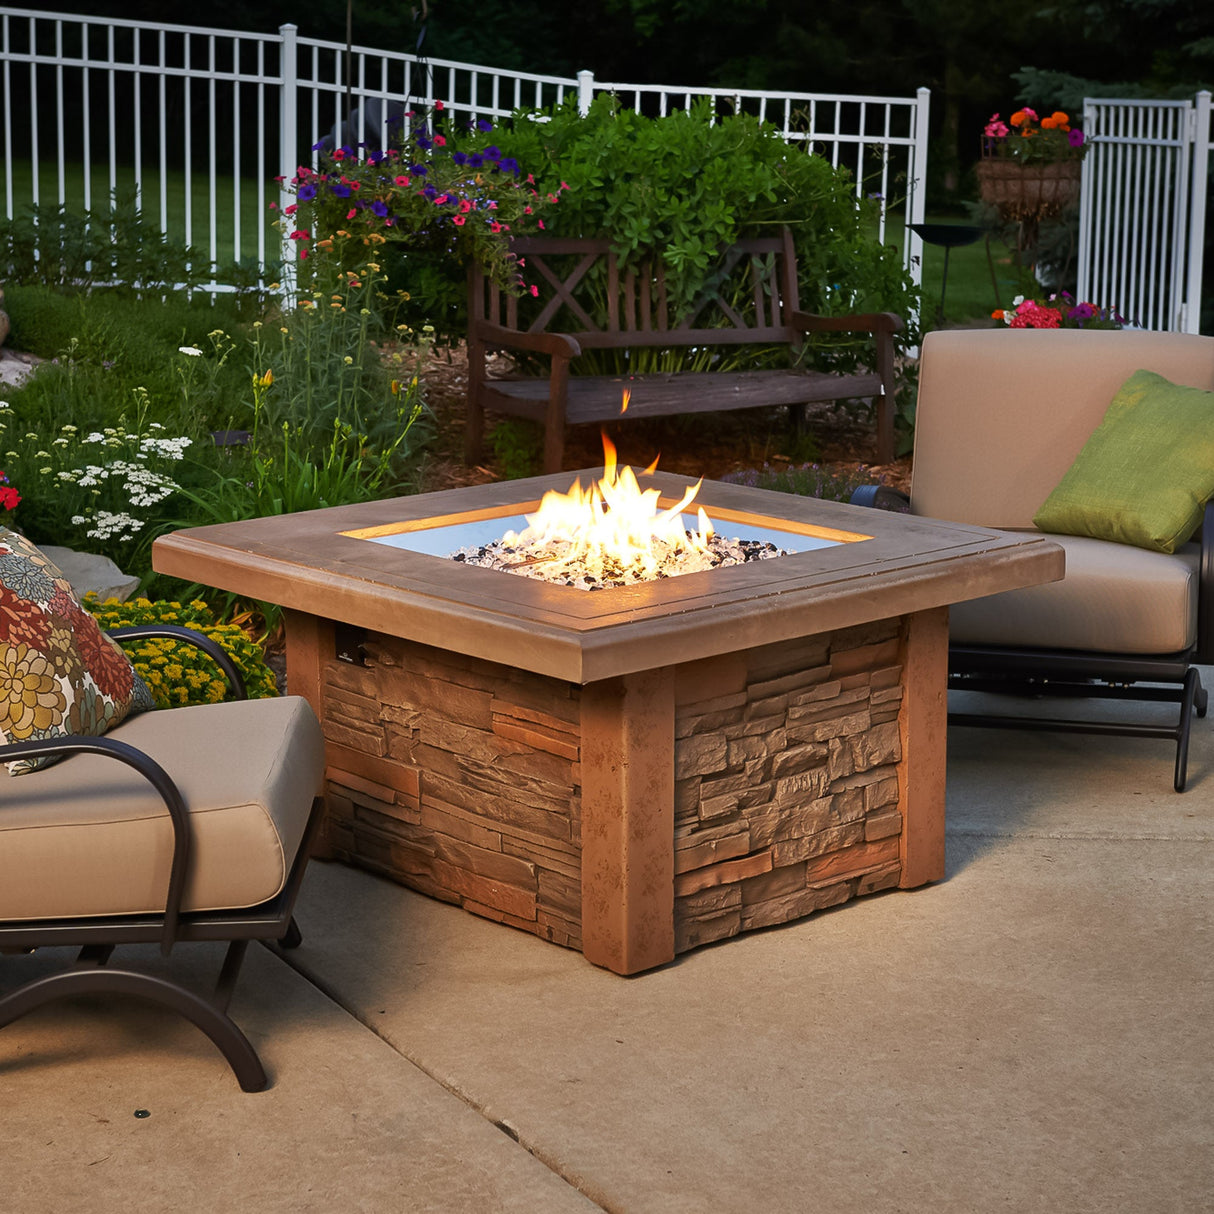 The Sierra Square Gas Fire Pit Table outside on a patio surrounded by outdoor furniture